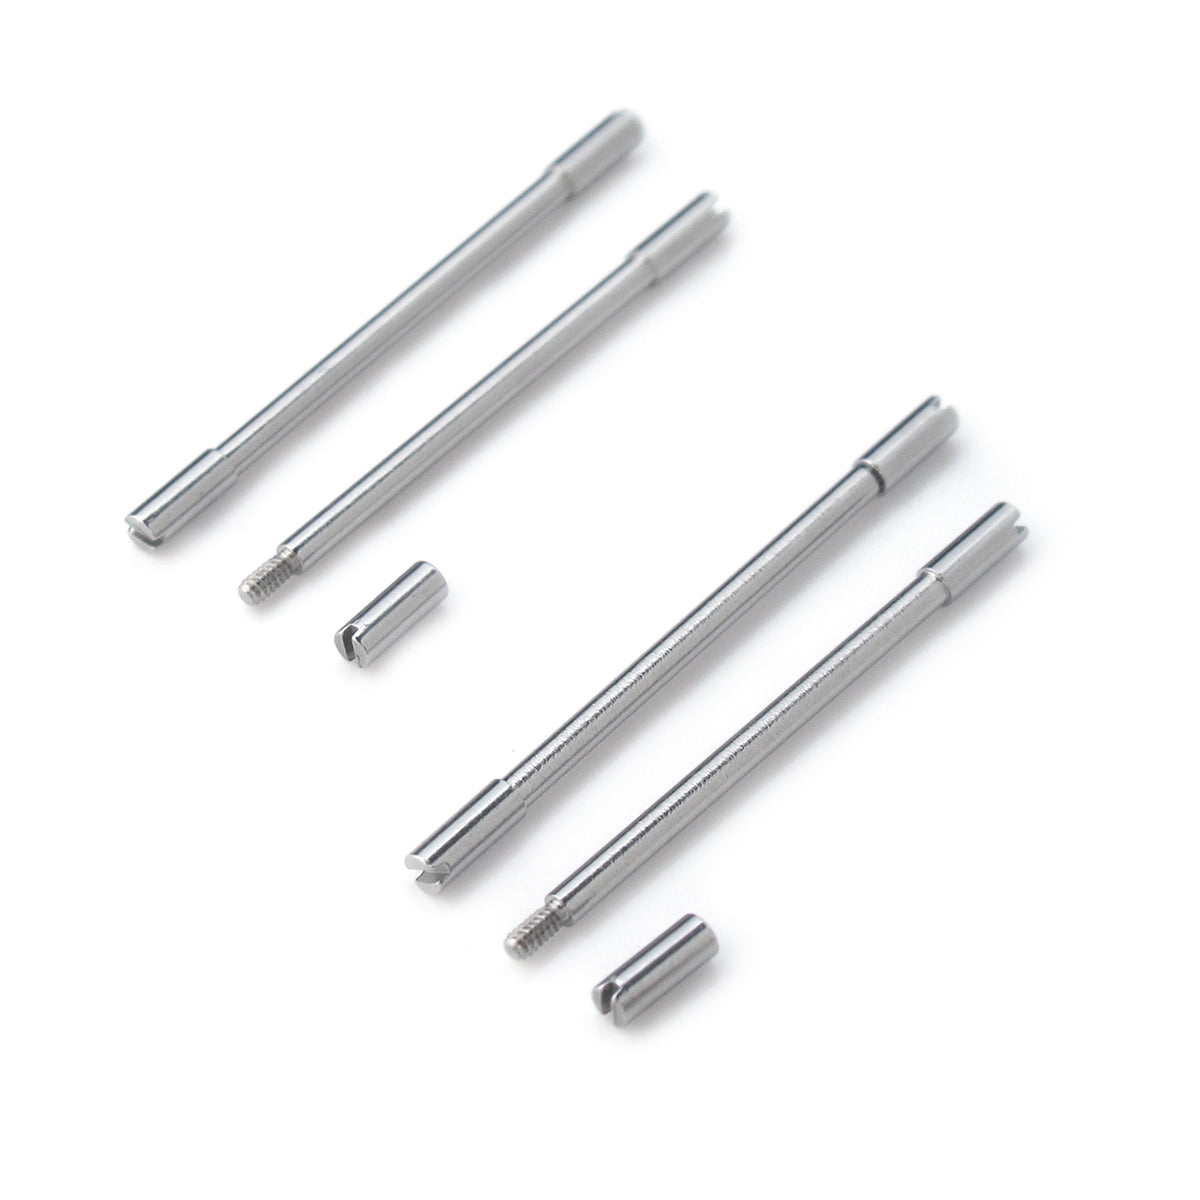 Screw-in Lug Bars Pins for 44mm New Model Audemars Piguet Royal Oak Offshore Leather Watch Band Strapcode Partss